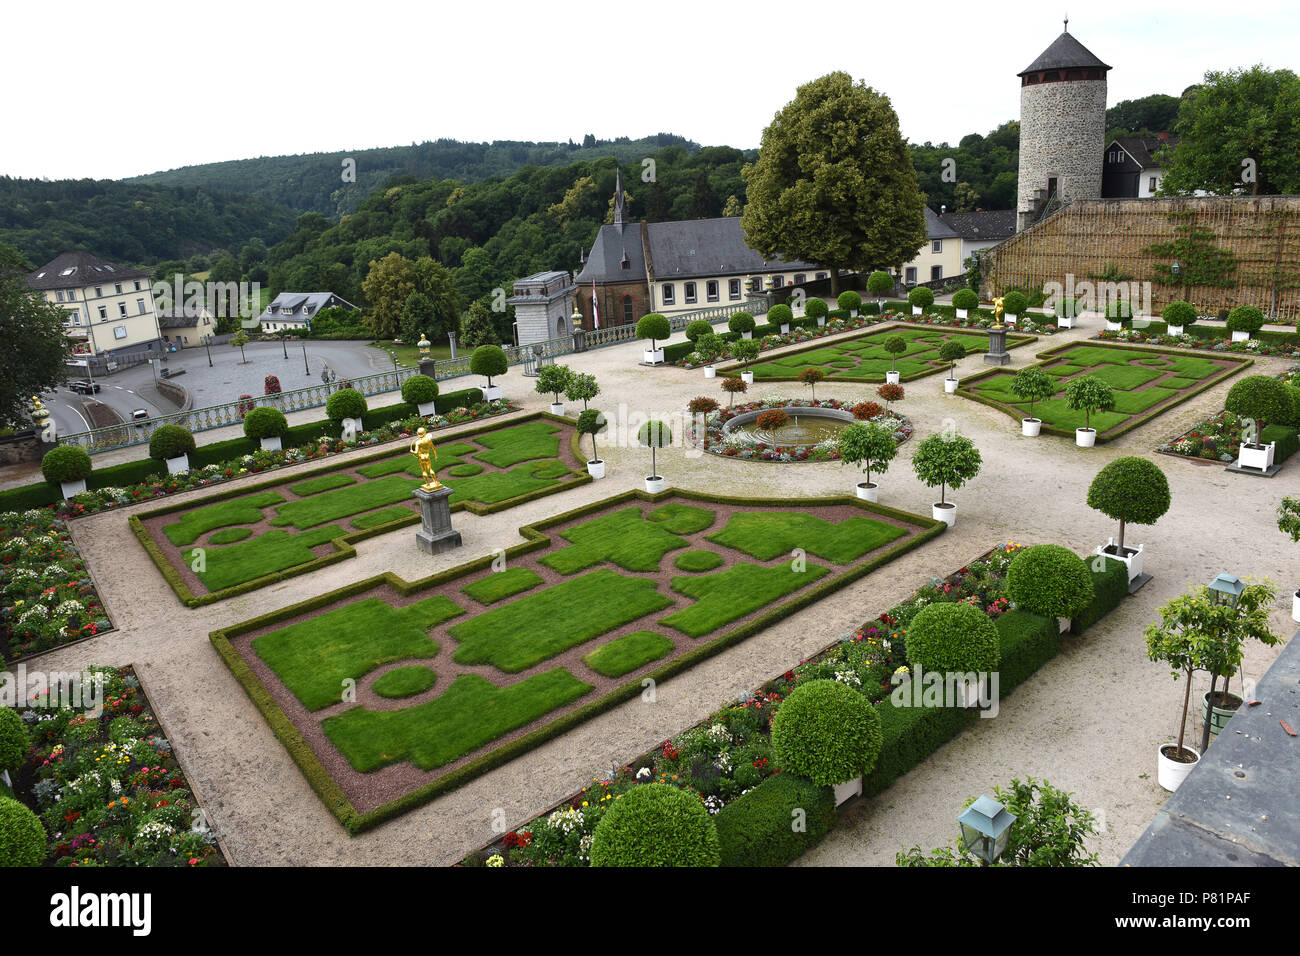 The gardens of the Schloss castle in Weilburg an der Lahn In Germany Europe Stock Photo